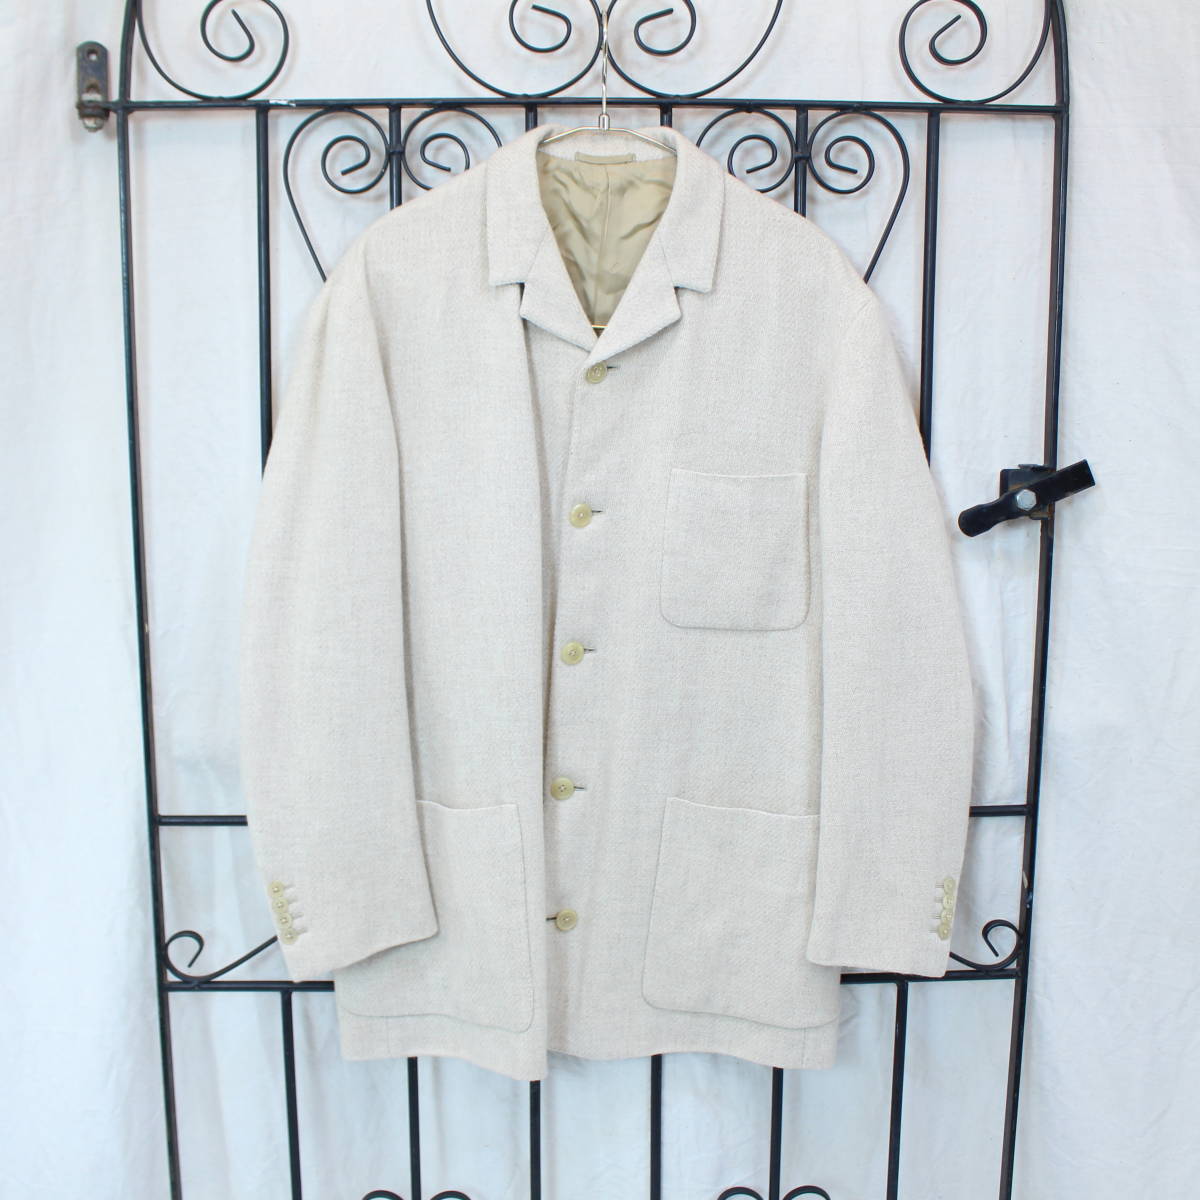 HERMES CASHMERE100% TAILORED JACKET MADE IN ITALY/エルメスカシミヤ